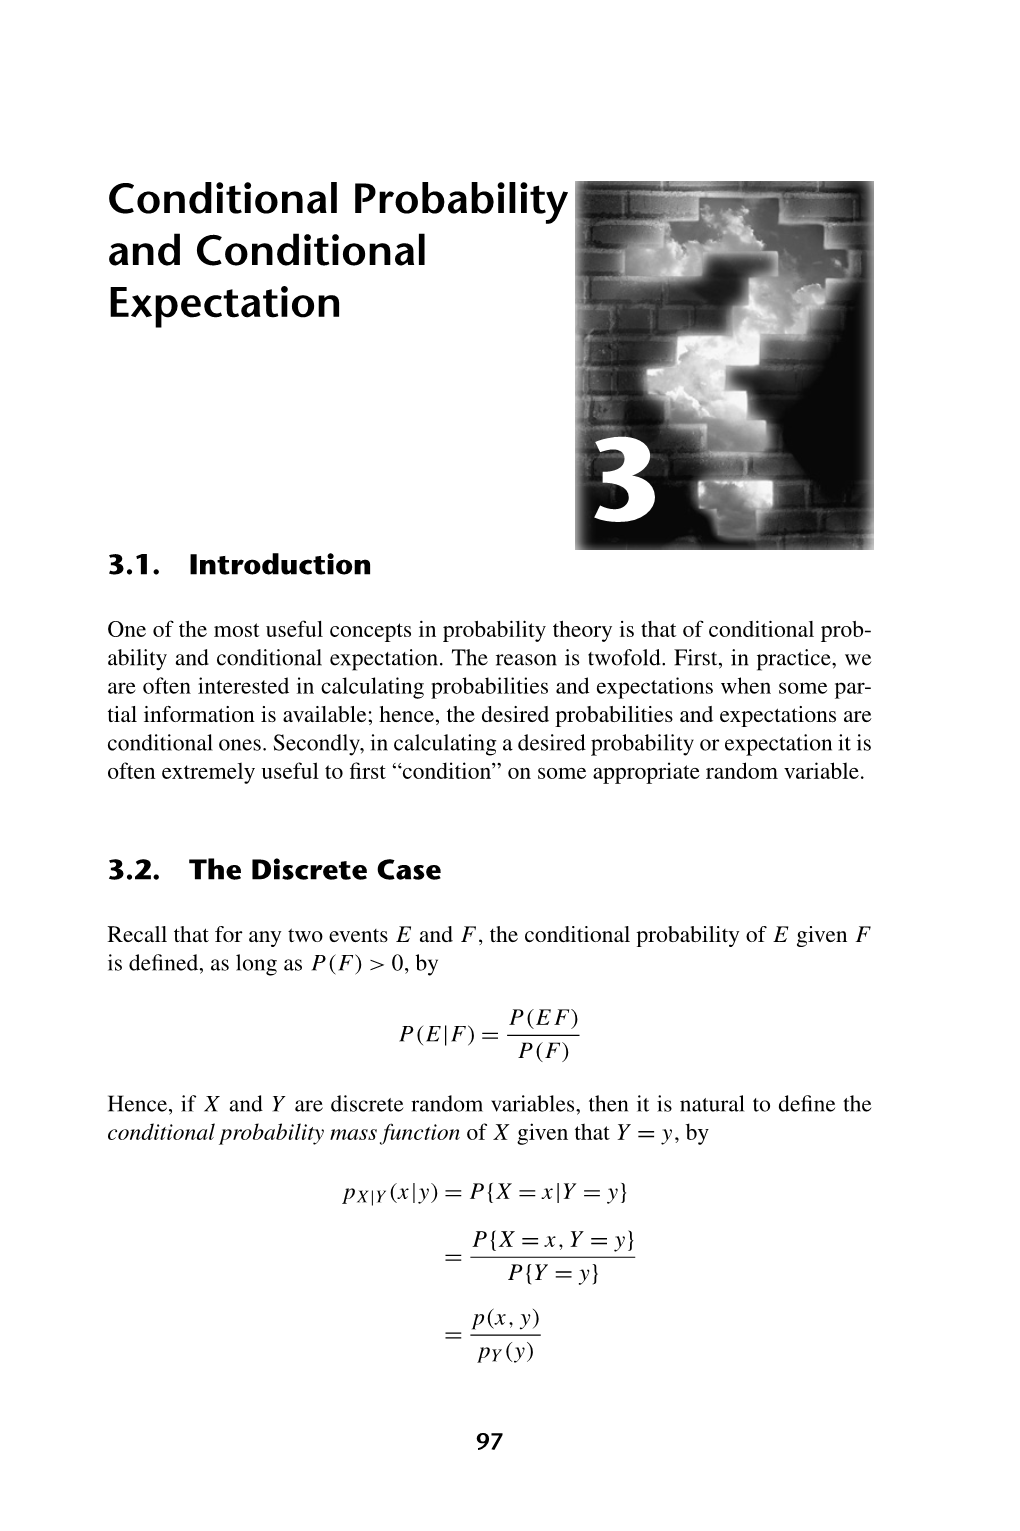 Conditional Probability and Conditional Expectation 3 3.1